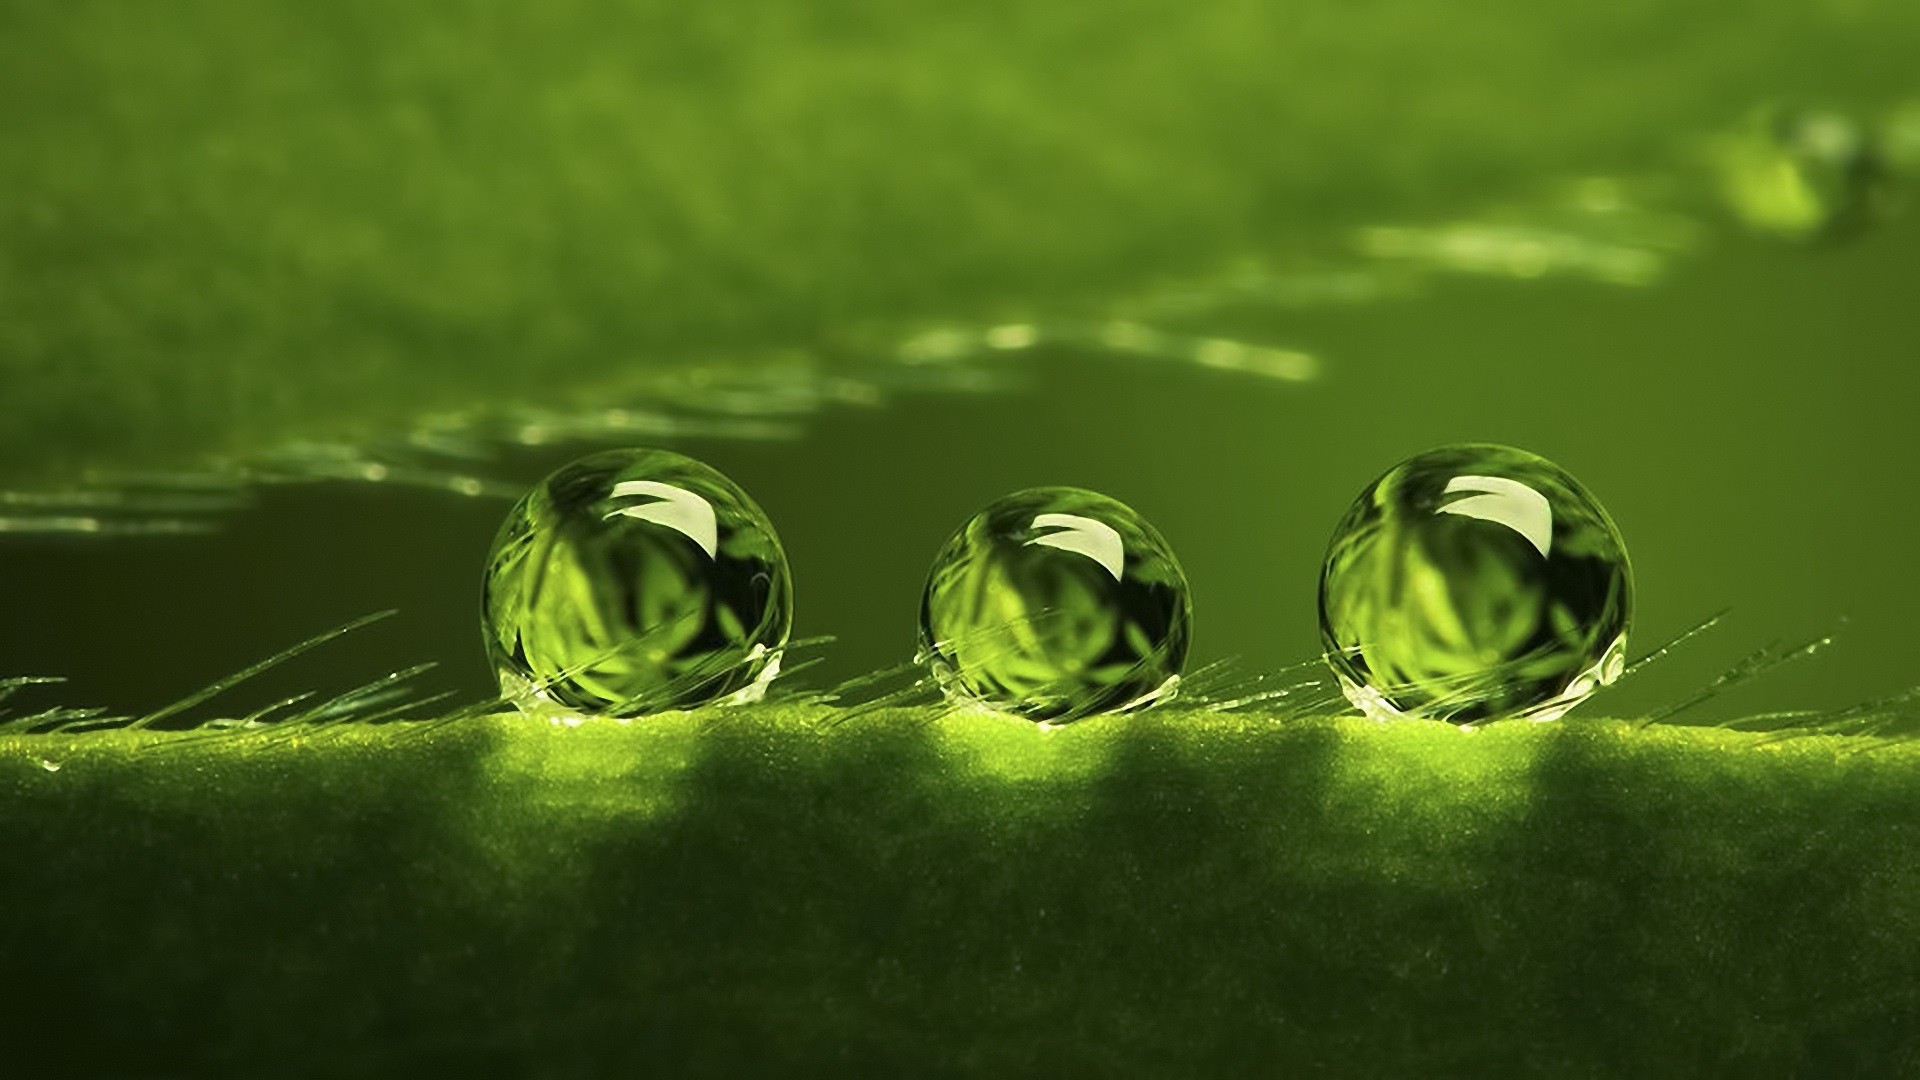 General 1920x1080 water drops macro plants green background nature